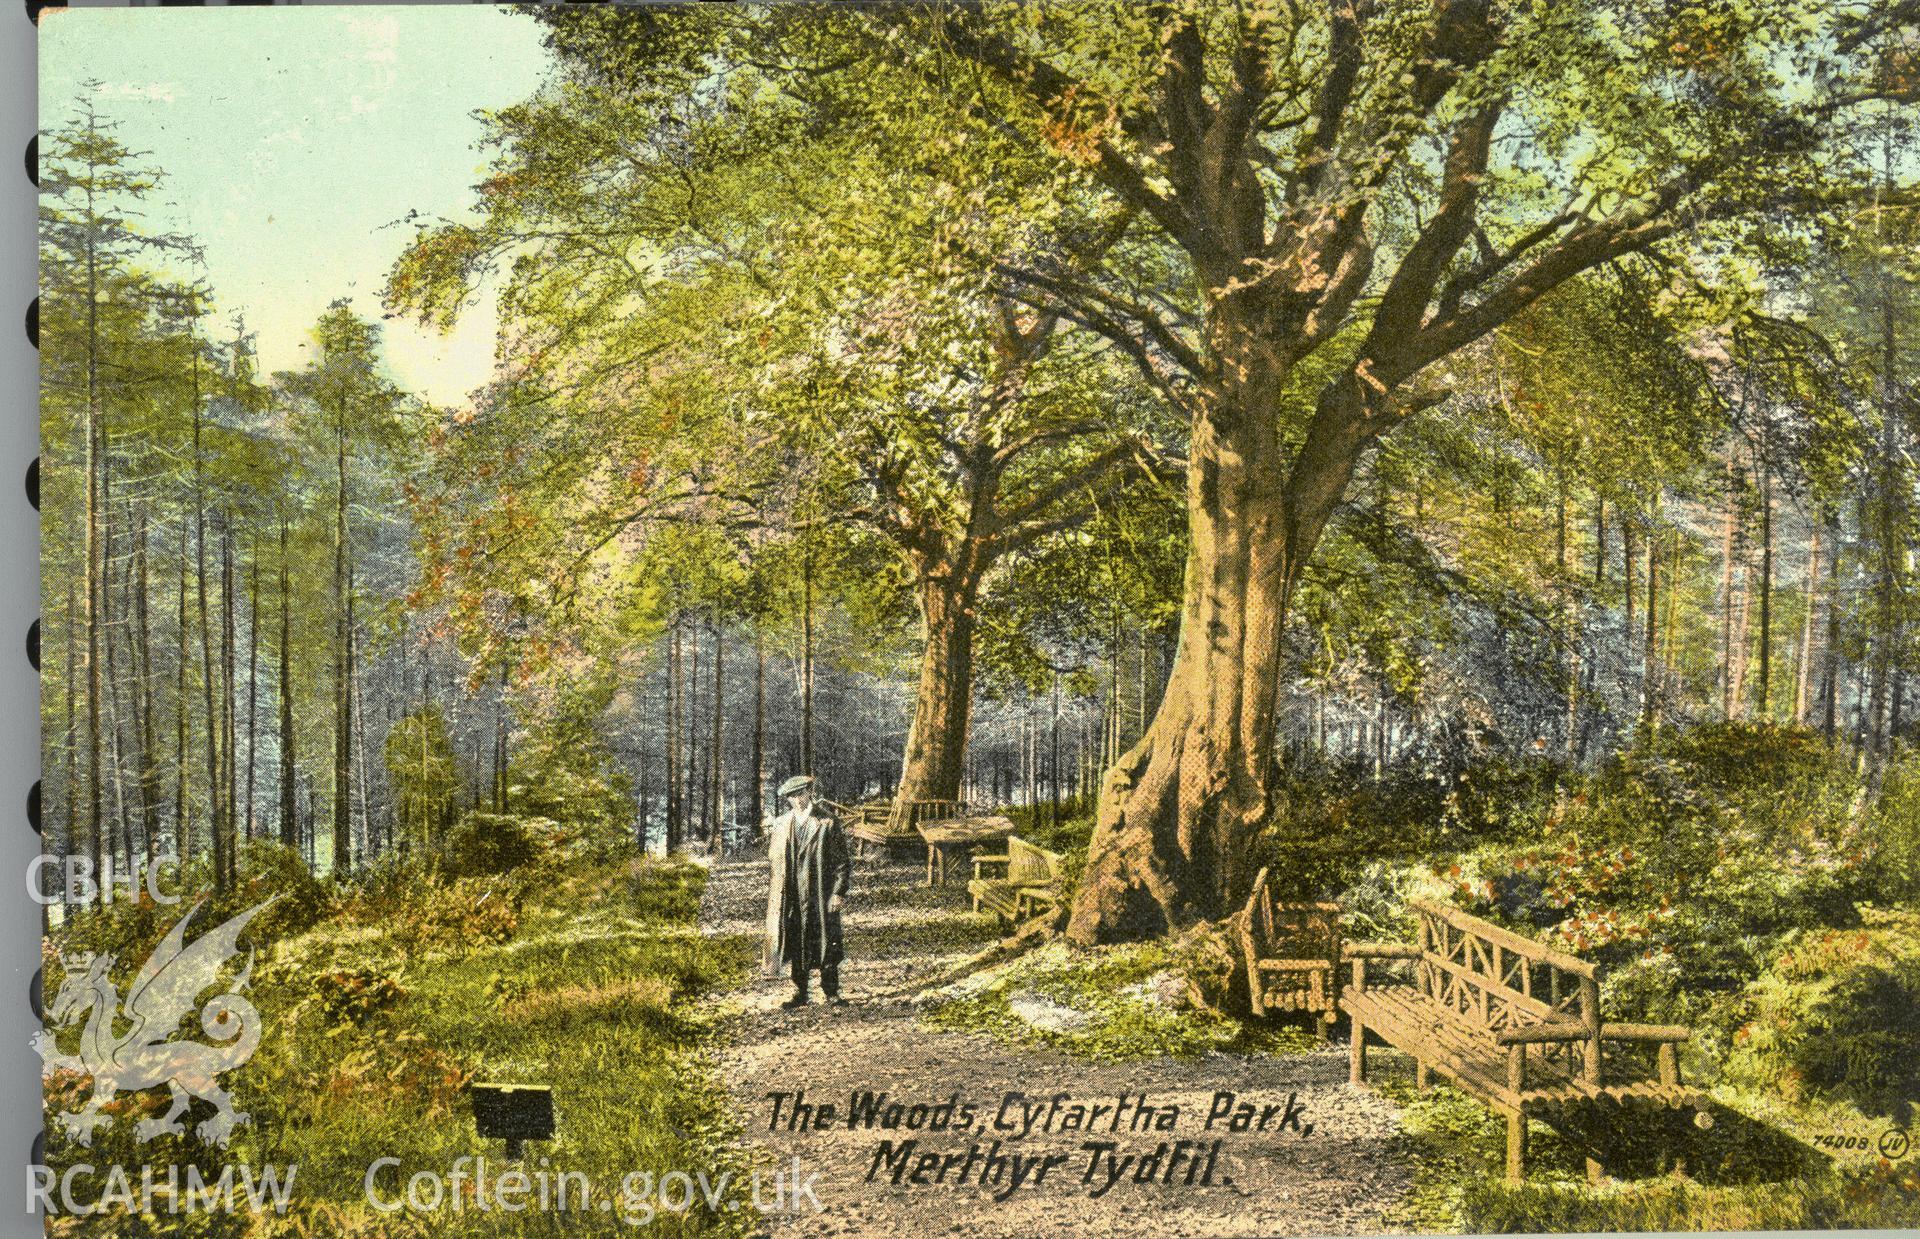 Digitised postcard image of Cyfarthfa Park, Merthyr Tydfil, showing rustic wooden benches with figure, Valentine and Sons Ltd. Produced by Parks and Gardens Data Services, from an original item in the Peter Davis Collection at Parks and Gardens UK. We hold only web-resolution images of this collection, suitable for viewing on screen and for research purposes only. We do not hold the original images, or publication quality scans.